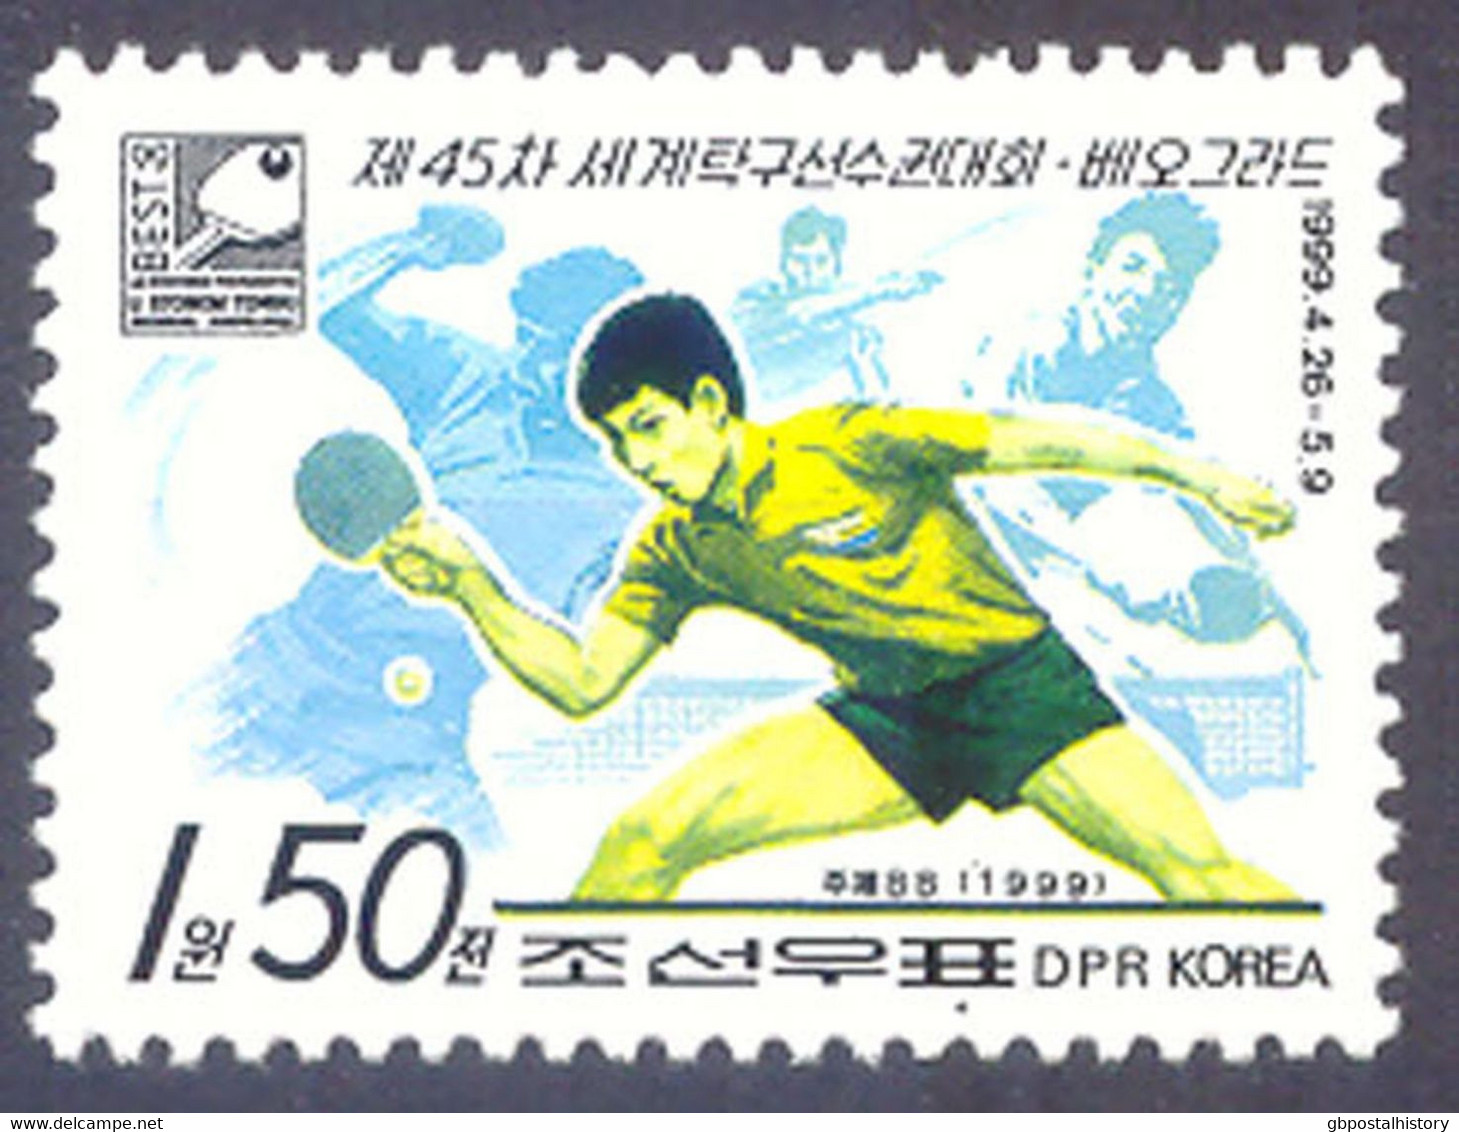 NORD-KOREA 1999, 1 W. 50 Ch. Table Tennis, Very Fine U/M, MAJOR VARIETY: MISSING RED COLOR, Extremely Rare, RRR !!! - Korea (Nord-)